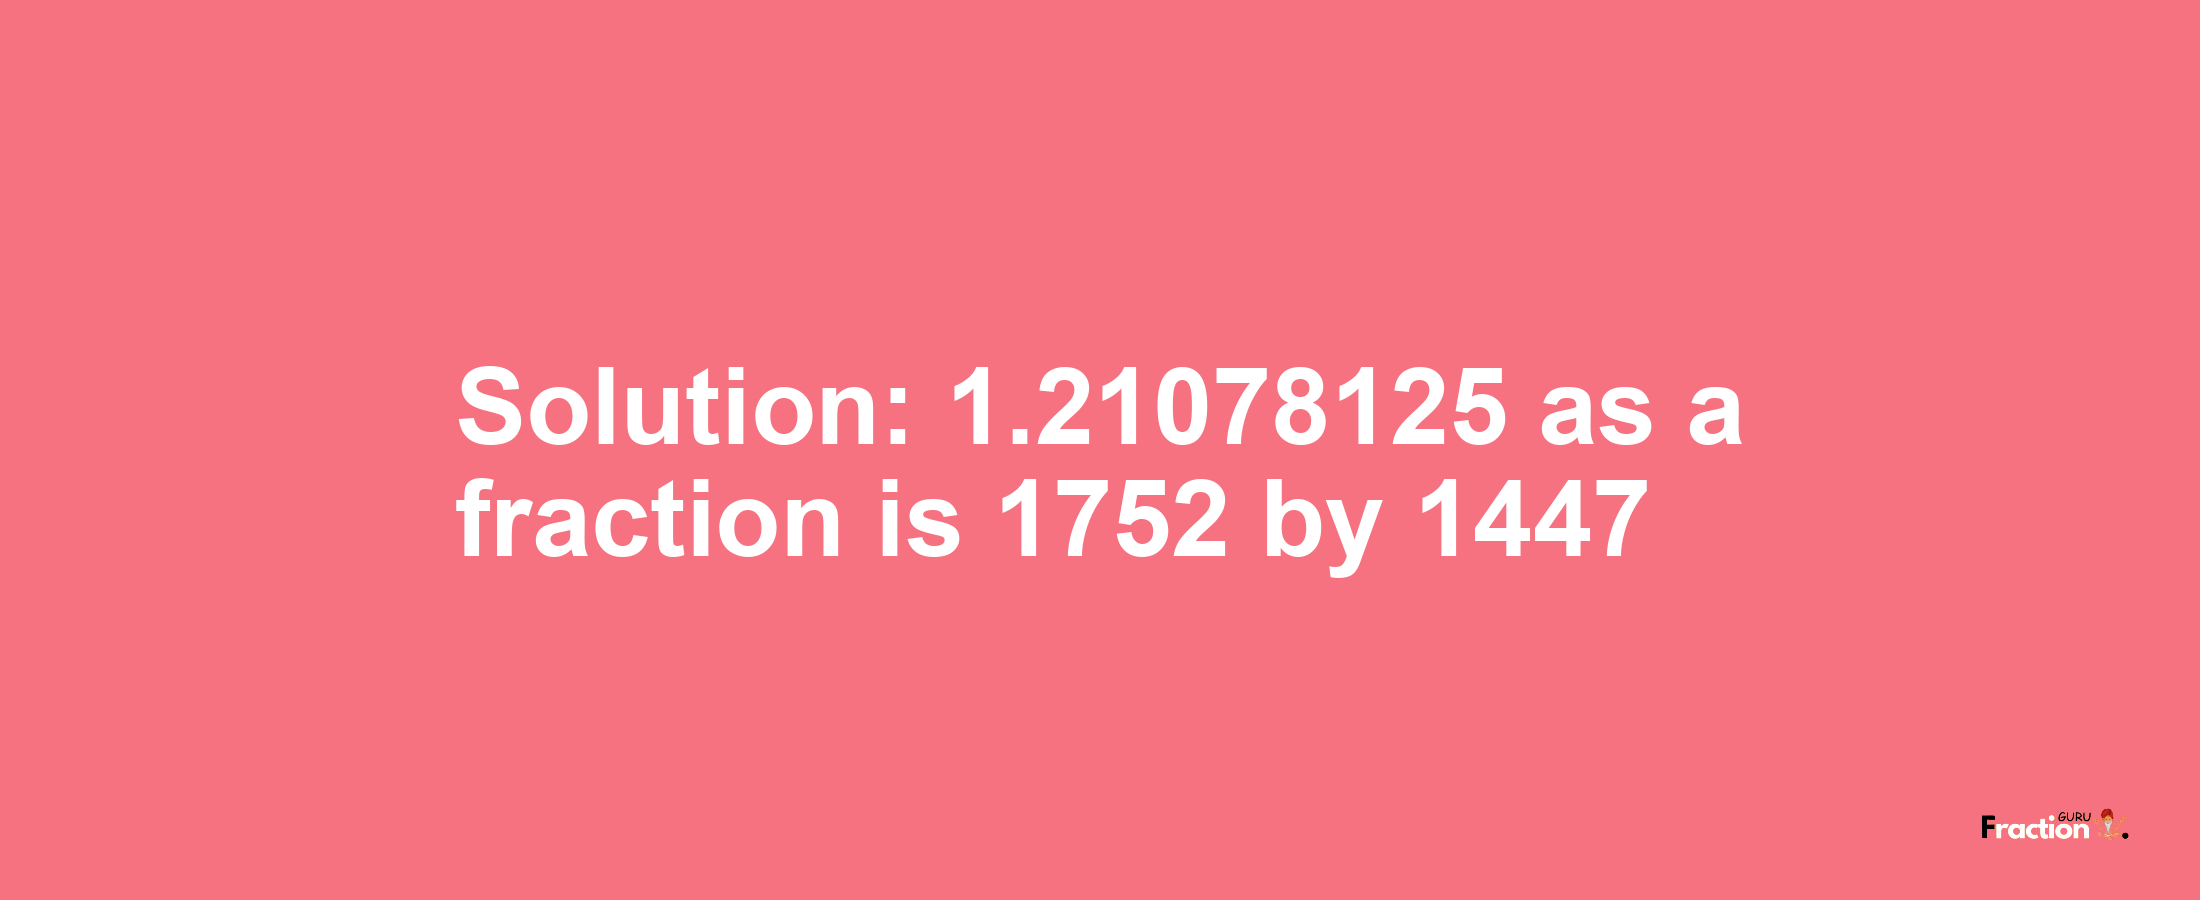 Solution:1.21078125 as a fraction is 1752/1447